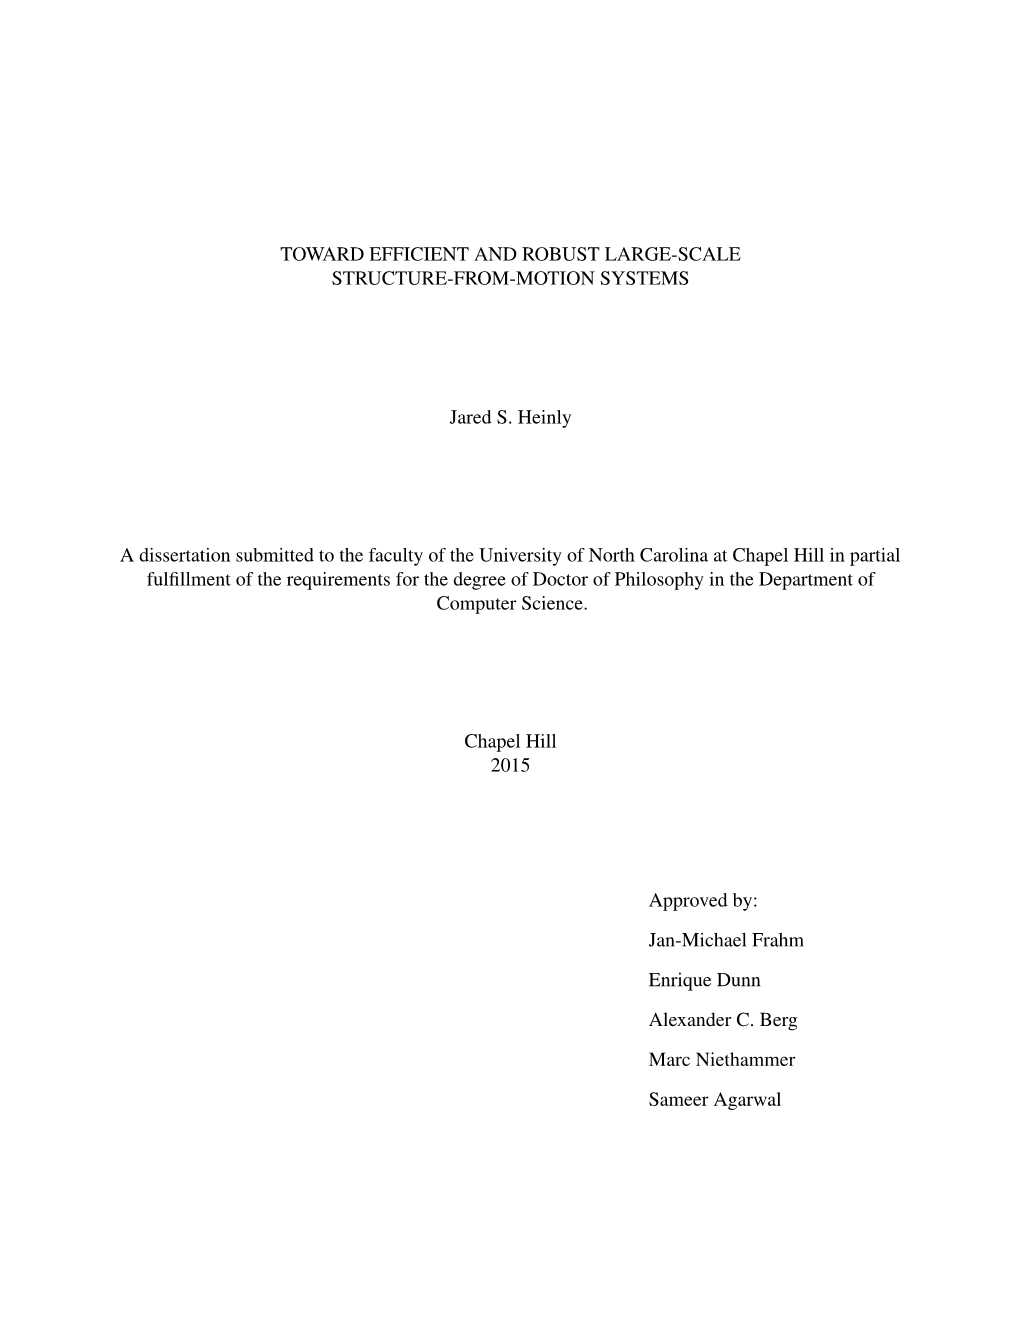 TOWARD EFFICIENT and ROBUST LARGE-SCALE STRUCTURE-FROM-MOTION SYSTEMS Jared S. Heinly a Dissertation Submitted to the Faculty Of